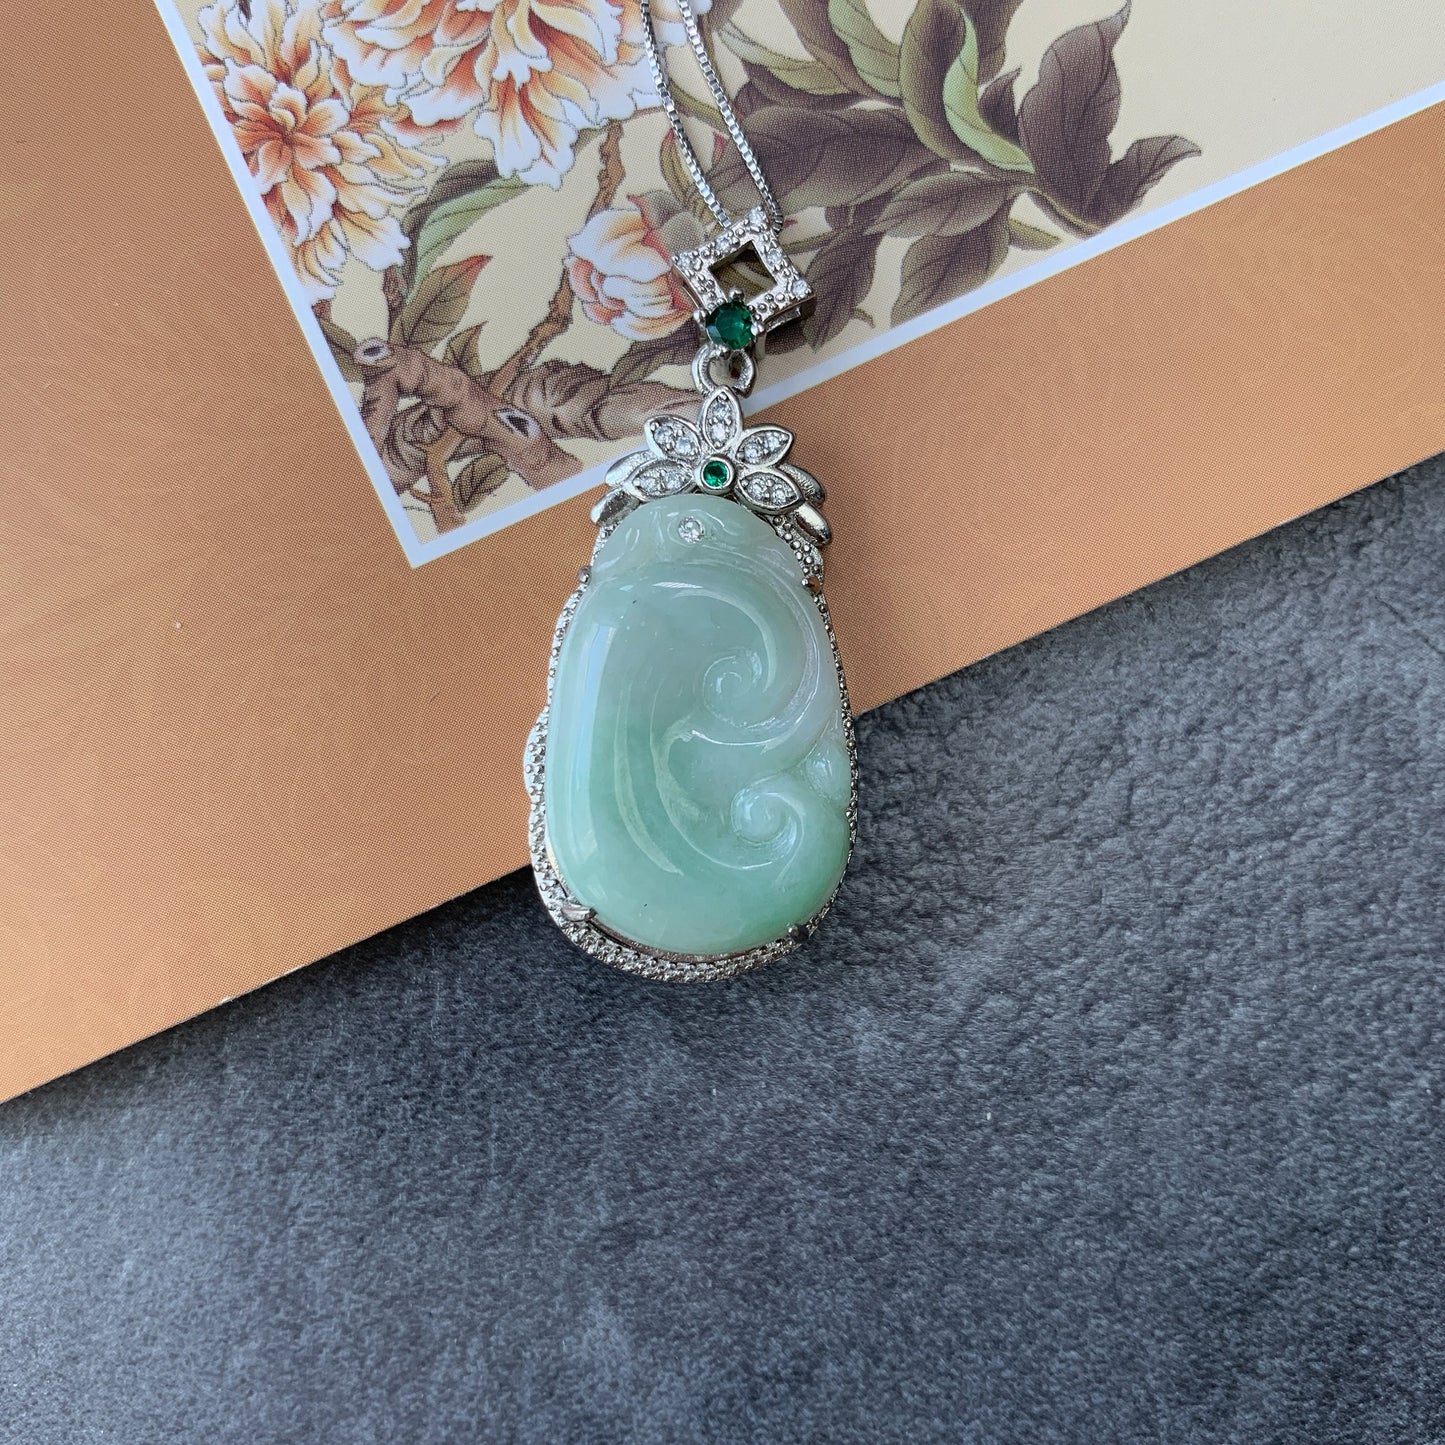 Jadeite Jade Lucky Ruyi, Ru Yi, 如意, Sterling Silver Pendant Hand Carved Necklace, BJ-0621-0003439-1 - AriaDesignCollection